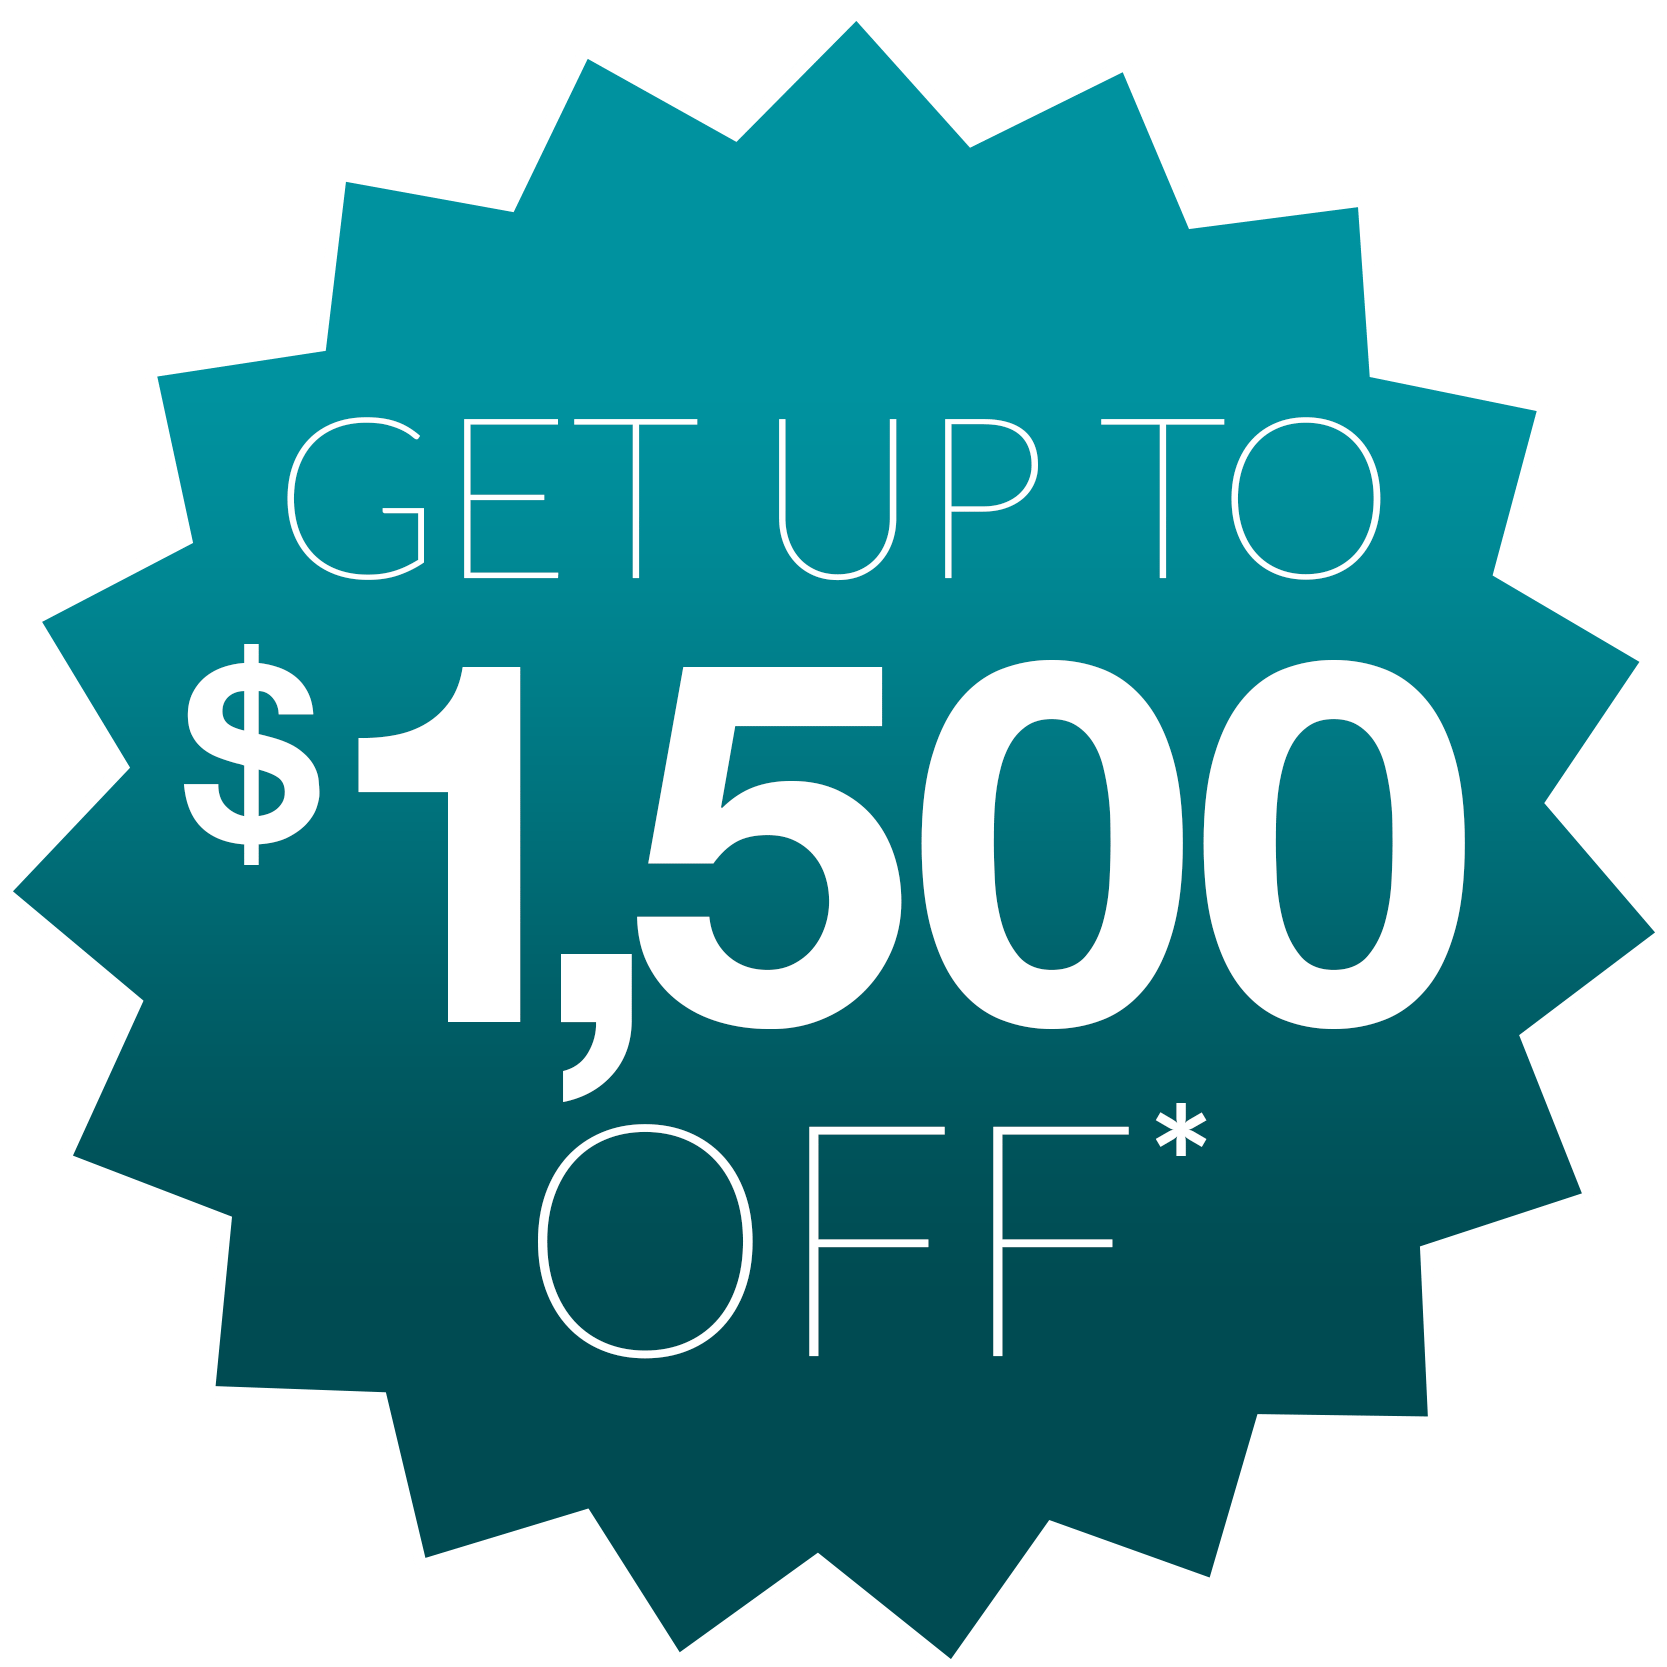 Obalon up to $1500 off